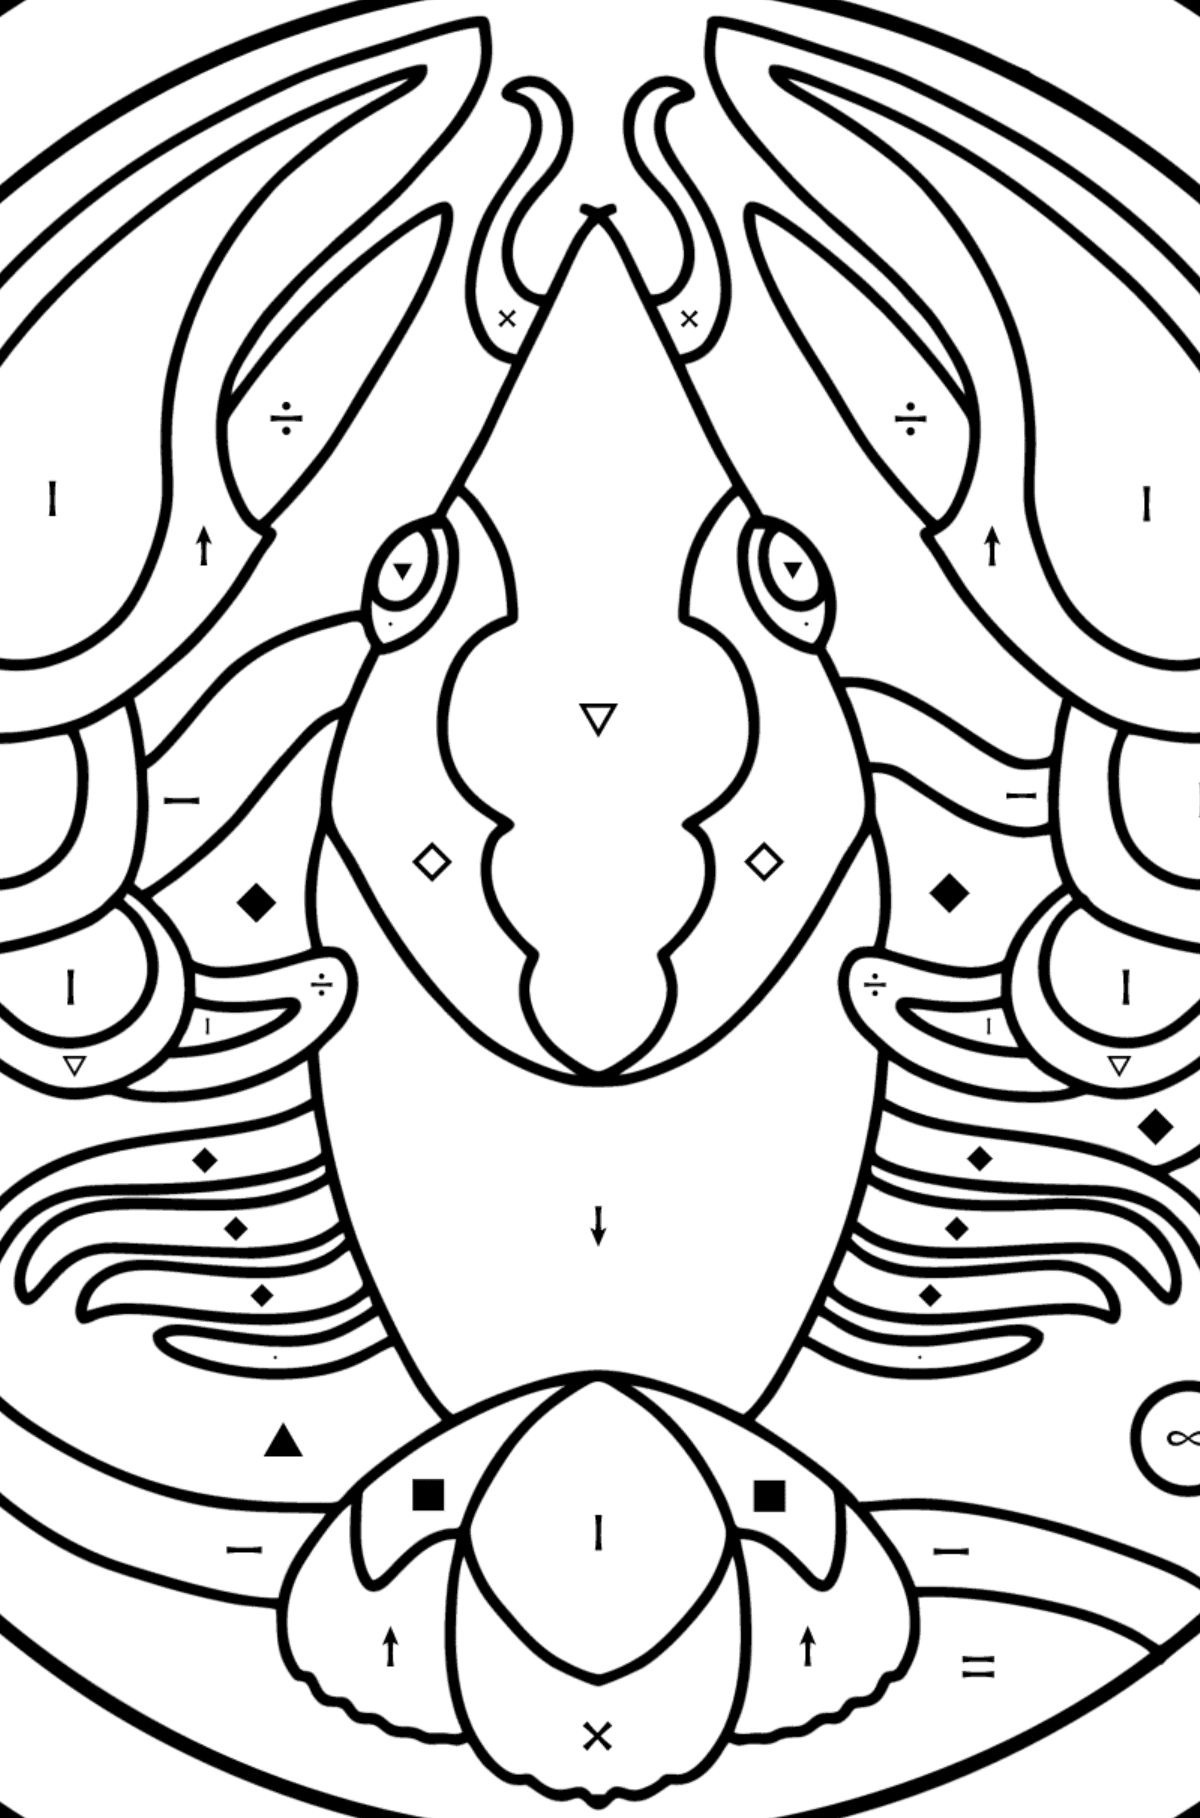 Coloring page for kids - Cancer zodiac sign - Coloring by Symbols for Kids